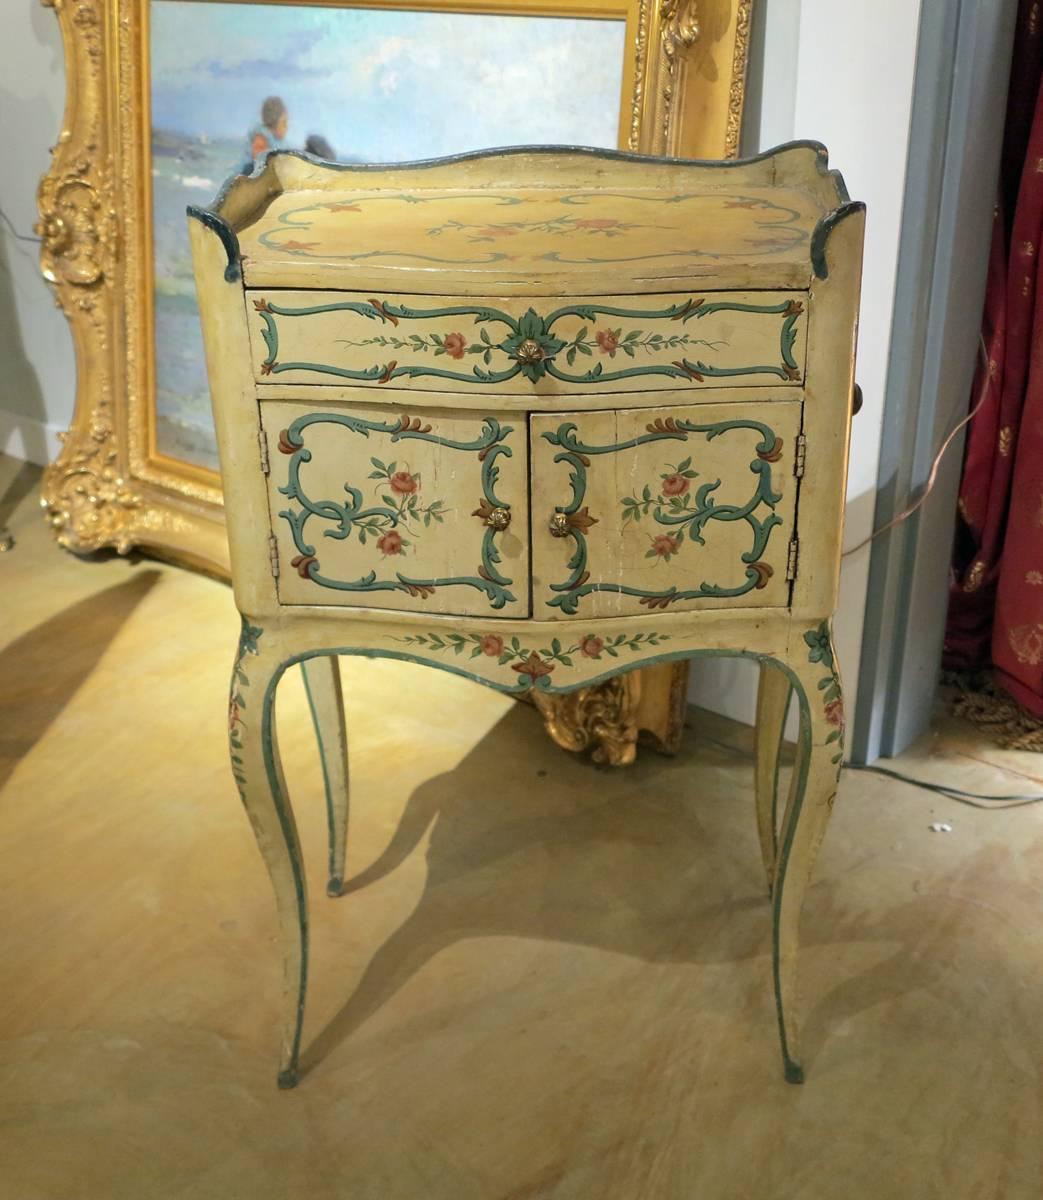 An Italian Venetian Louis XV painted stand
18th century 

Decorated throughout with a single drawer over two cupboard doors all on cabriole legs.

Measures: Height 33 in, width 20 in, depth 20 in. 

Provenance:
Private Collection New